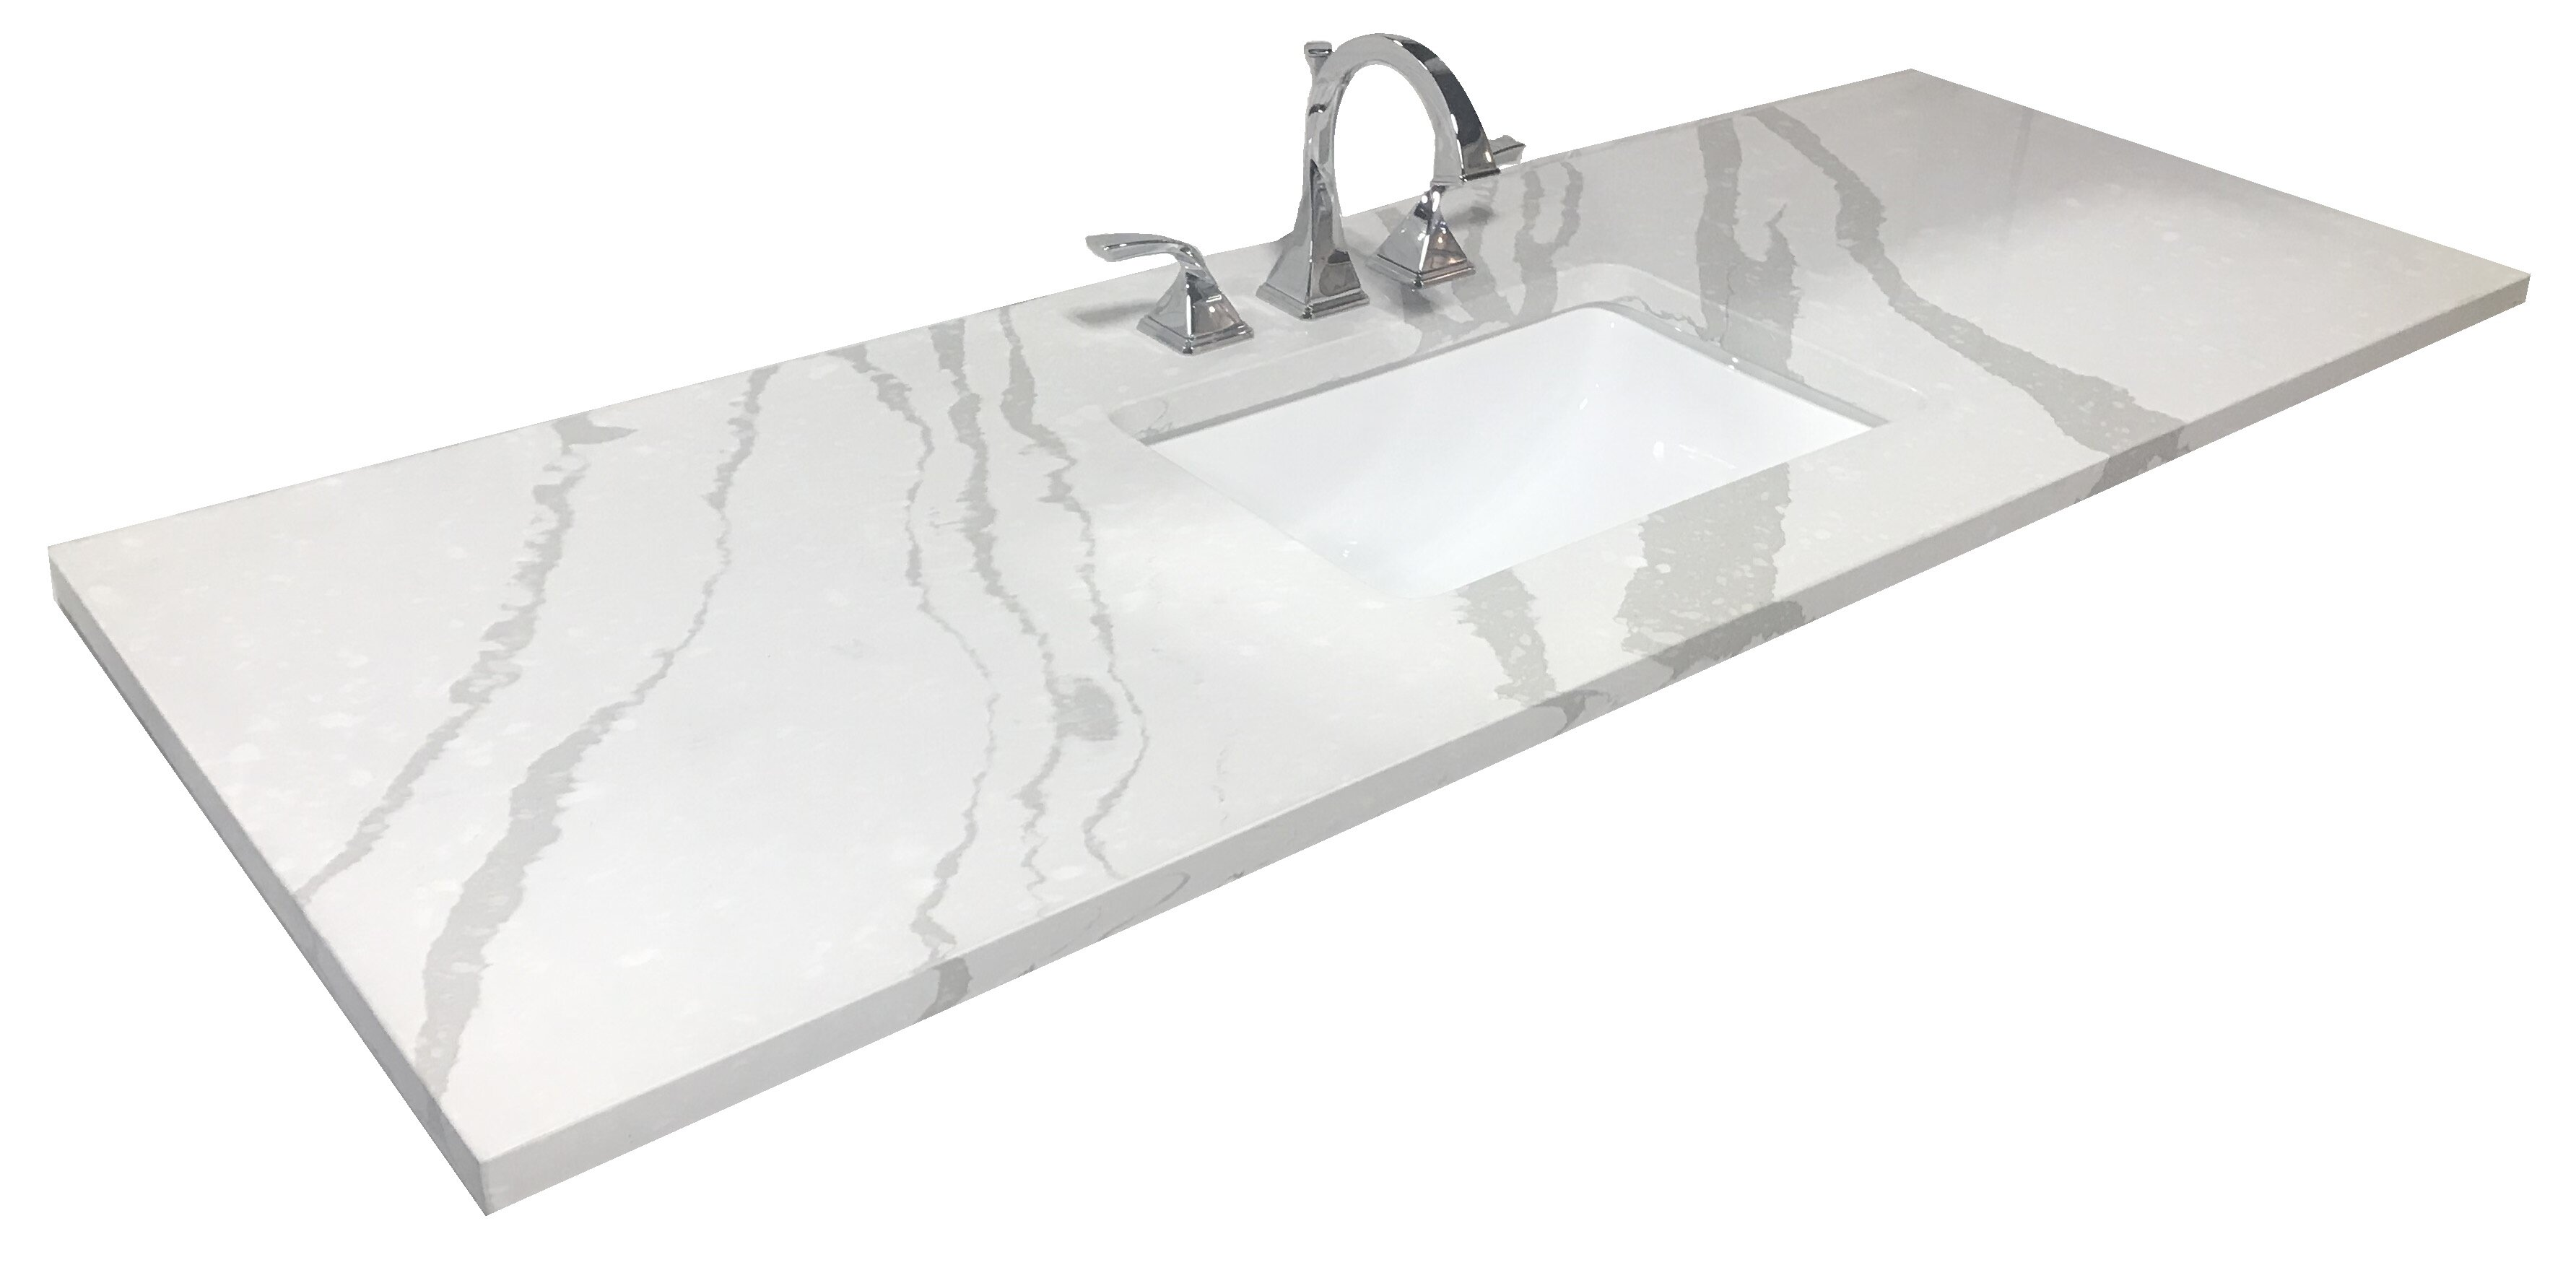 Quartz vs. Marble: Which Makes a Better Vanity Top